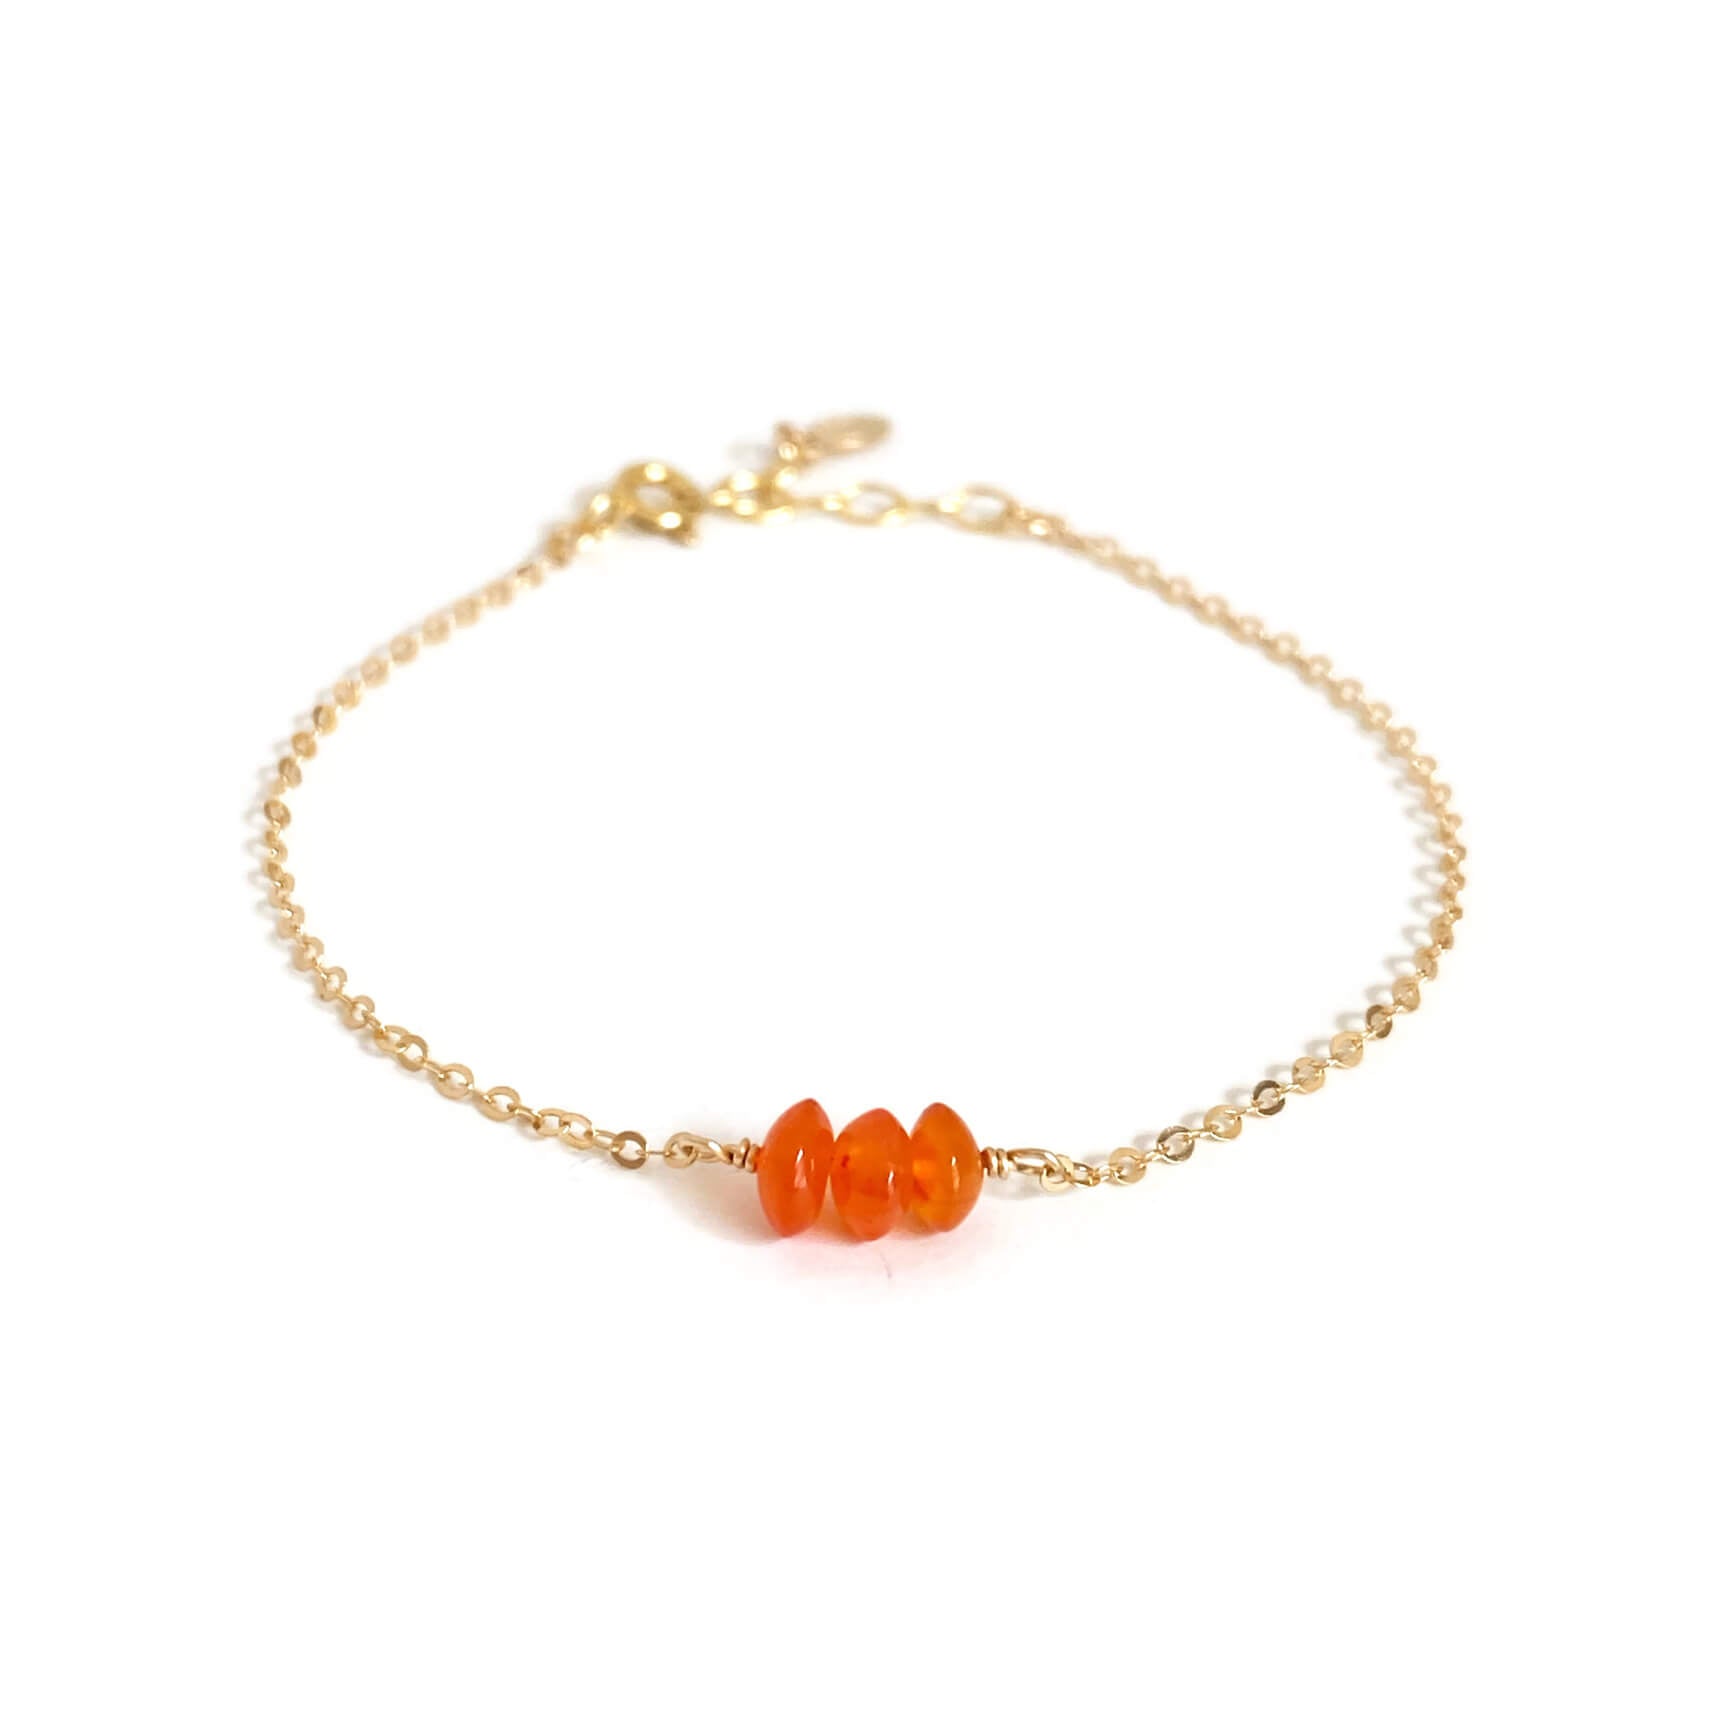 This is a genuine carnelian bracelet that is made of gold filled chain. It's dainty and adjustable.  